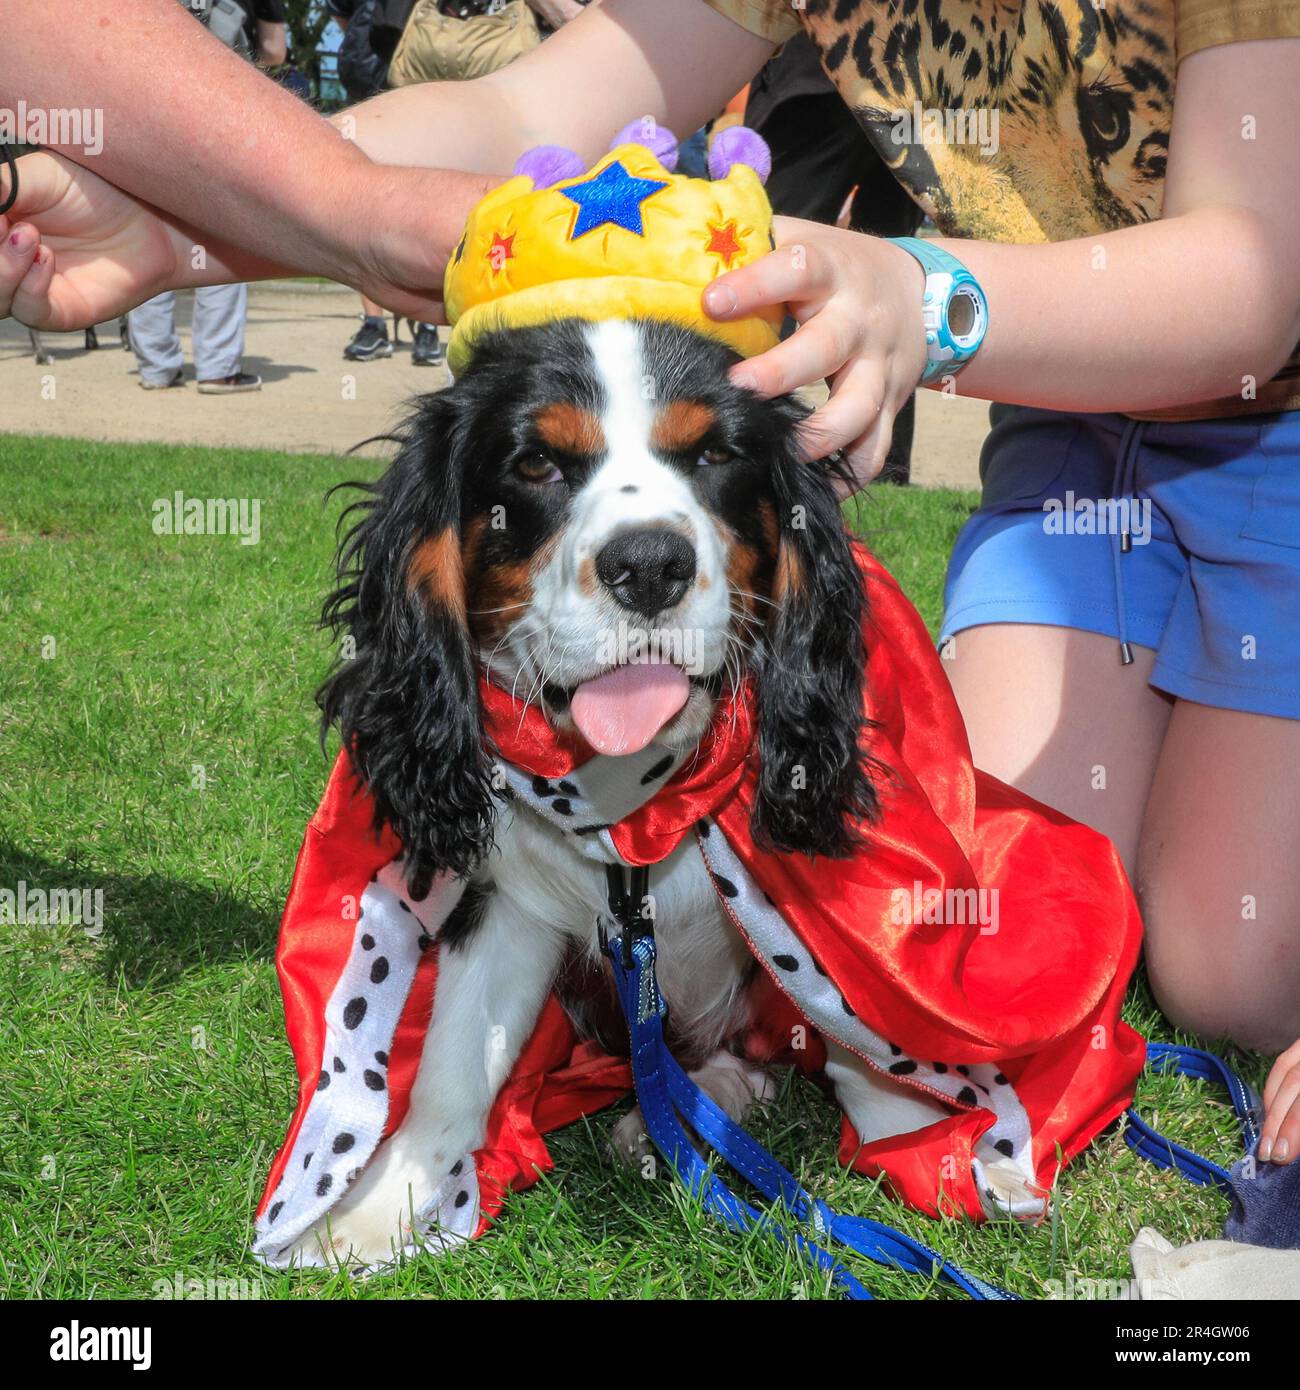 London, UK. 28th May, 2023. Final adjustments for the king's coronation. Loki, a 7-month old Cavalier King Charles in a befitting King Charles outfit enjoys competing for best dressed dog. Old Royal Naval College hosts the inaugural Greenwich Dog Show. The 10 show categories include Waggiest Tail, Best Owner Lookalike, Best Dressed Pooch, Scruffiest Dog and Cutest Pup. Judges are celebrity guest Nina Wadia, influencer Aurélie Four with corgi Marcel, Matthew Mees CEO and a Christopher Wren lookalike. Credit: Imageplotter/Alamy Live News Stock Photo